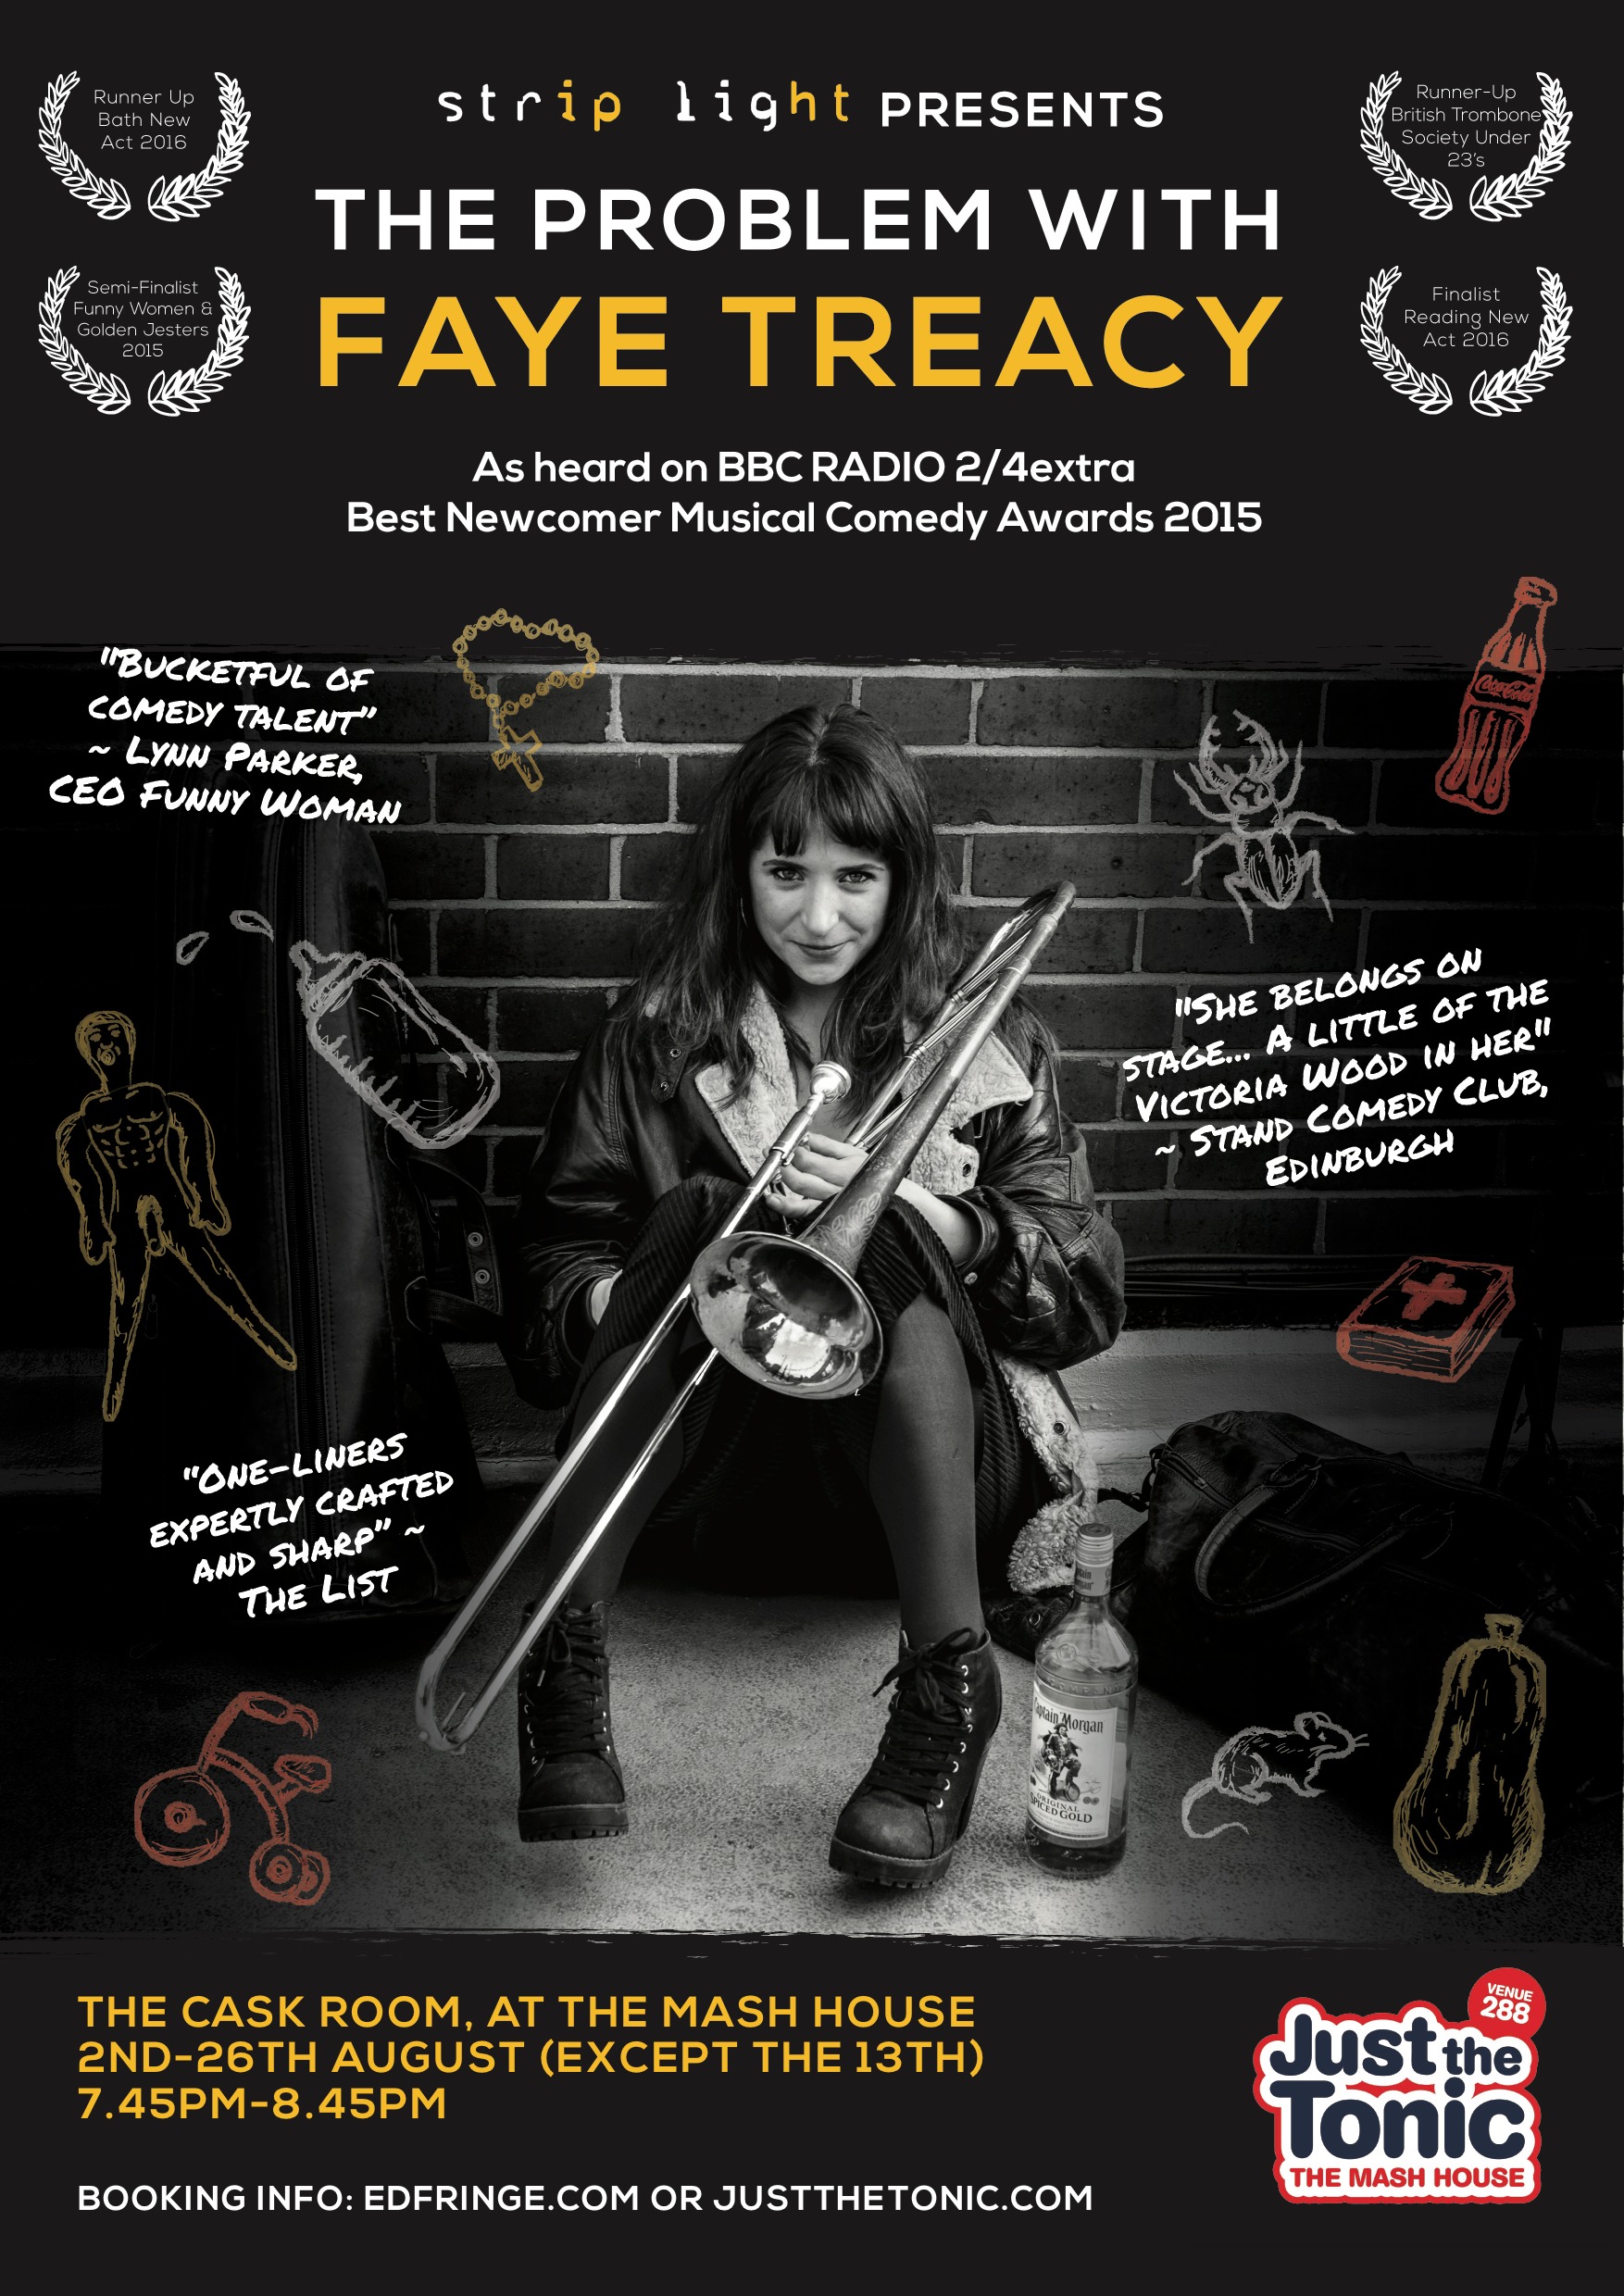 The poster for The Problem With Faye Treacy